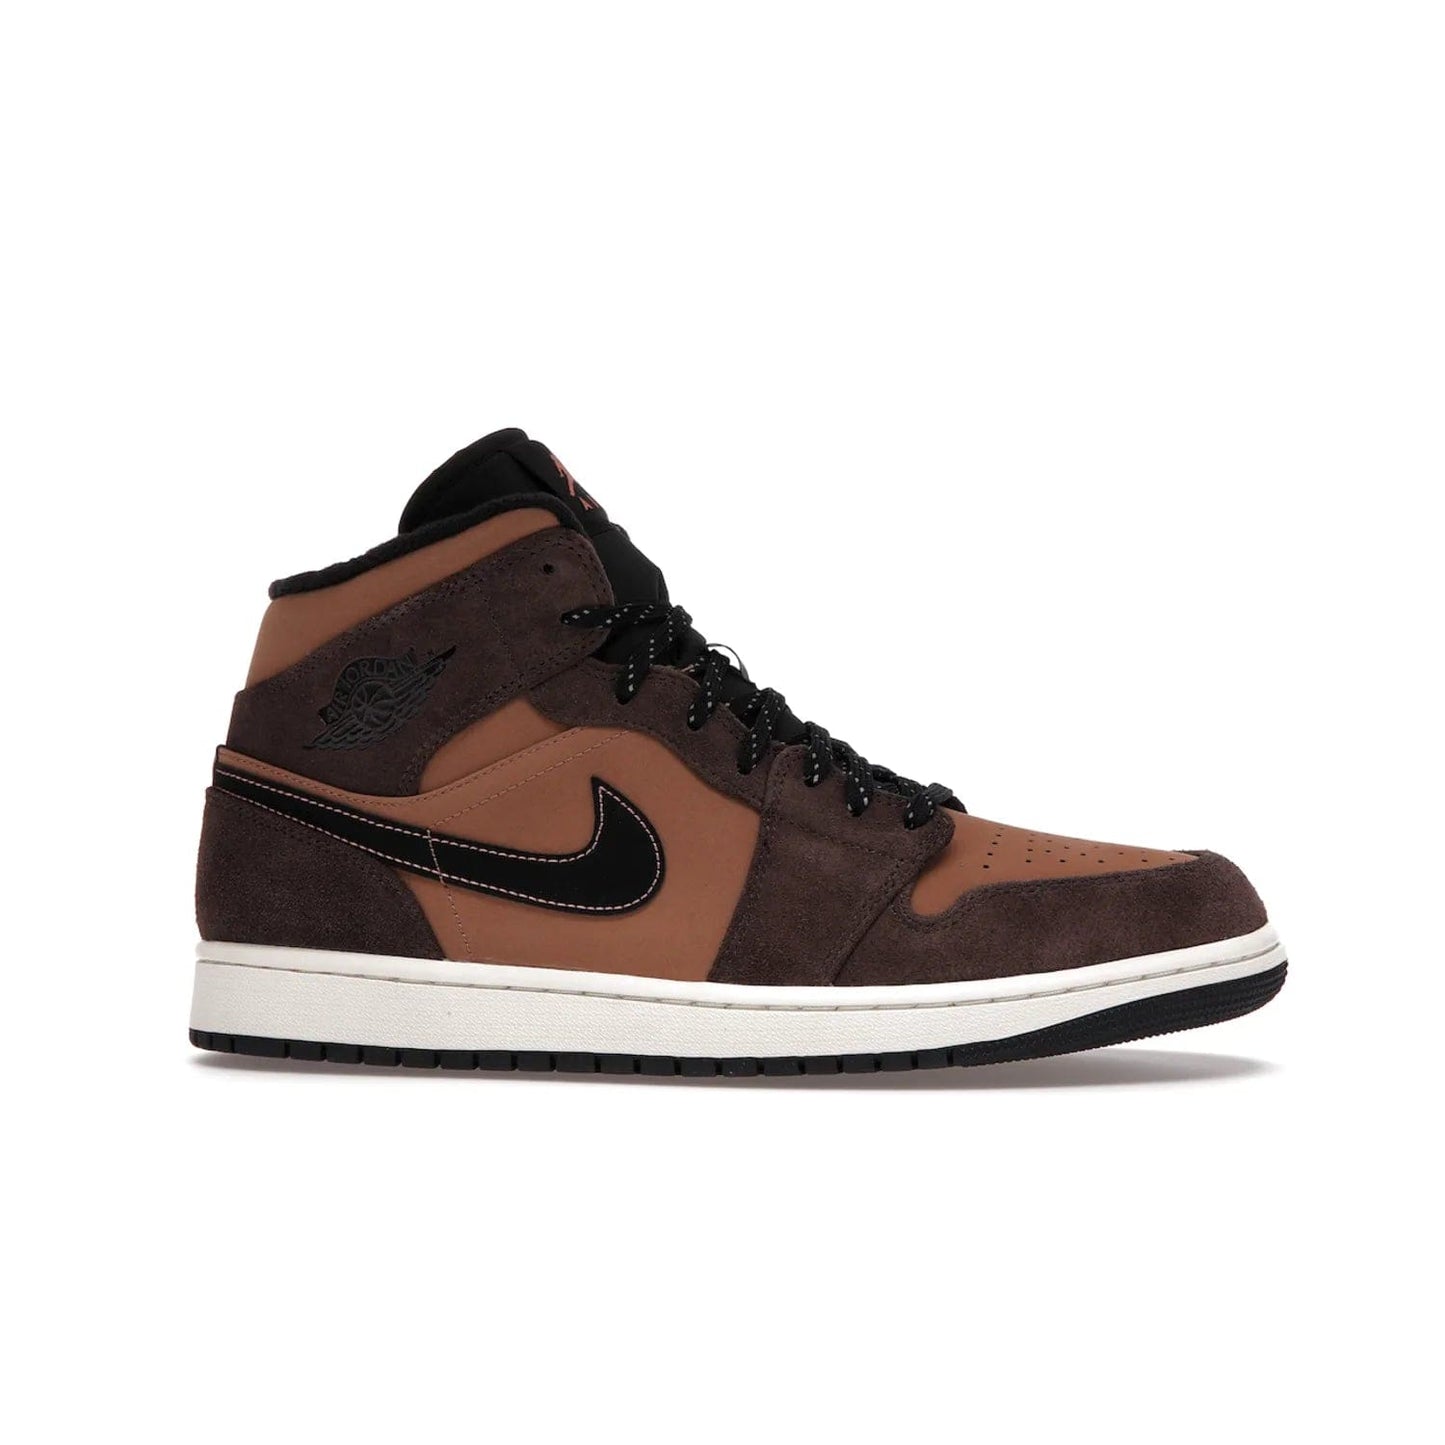 Jordan 1 Mid SE Dark Chocolate - Image 2 - Only at www.BallersClubKickz.com - This fashionable and functional Jordan 1 Mid SE Dark Chocolate features a light brown Durabuck upper, dark brown suede overlays, black Swoosh logos and reflective patch at heel. A must-have for any sneakerhead!